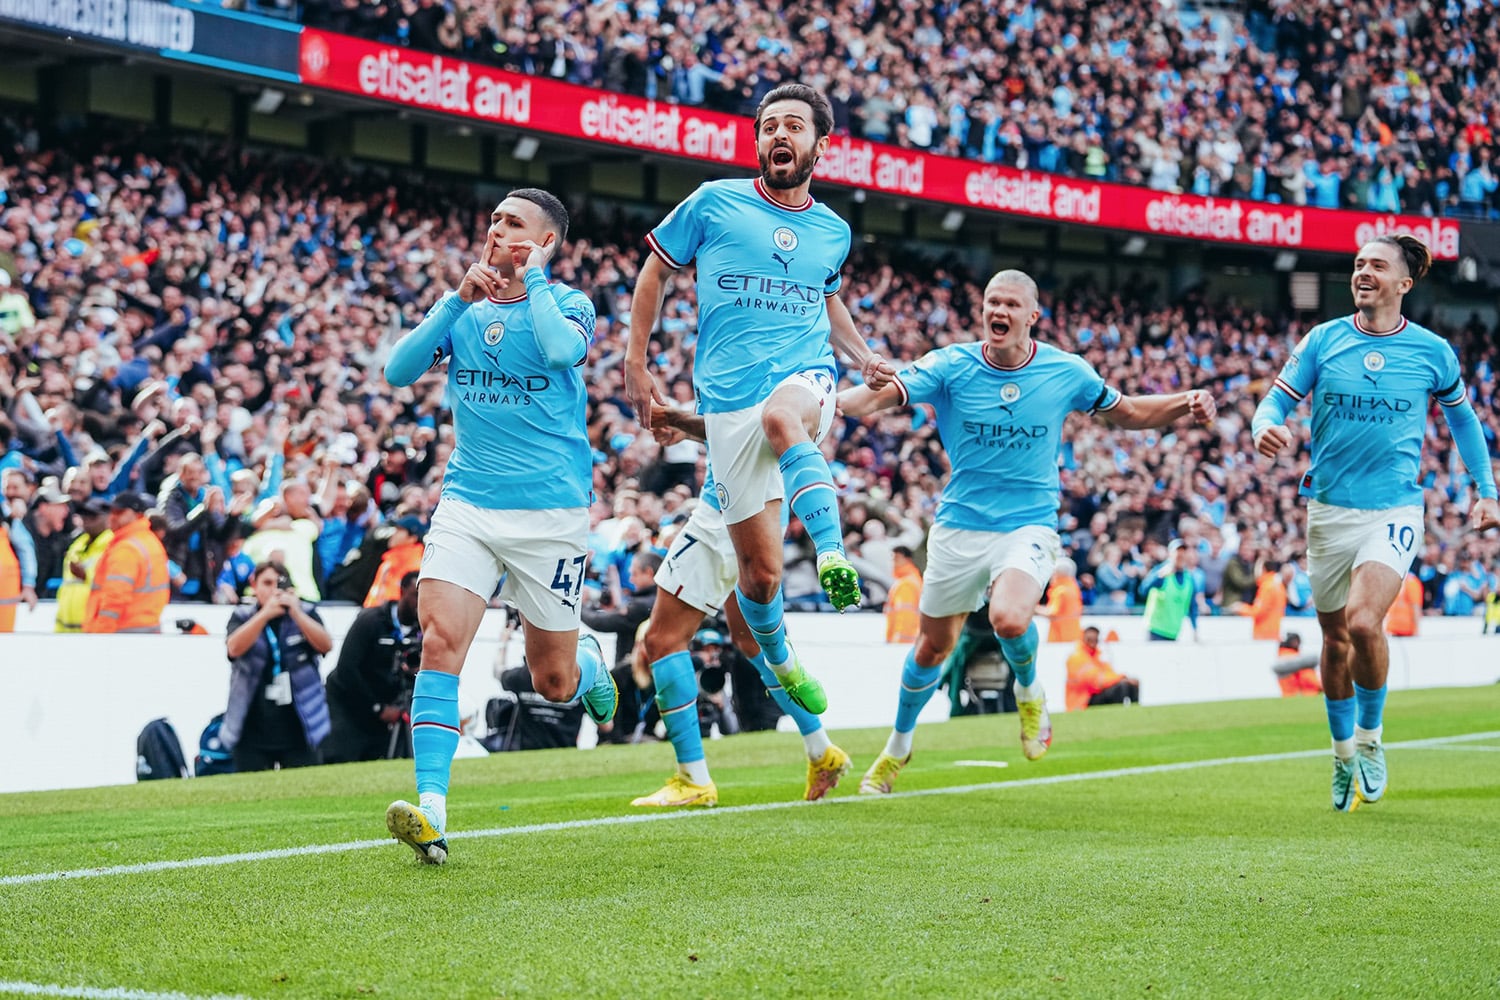 Manchester City Named Most Valuable Club Soccer Brand at $1.6B